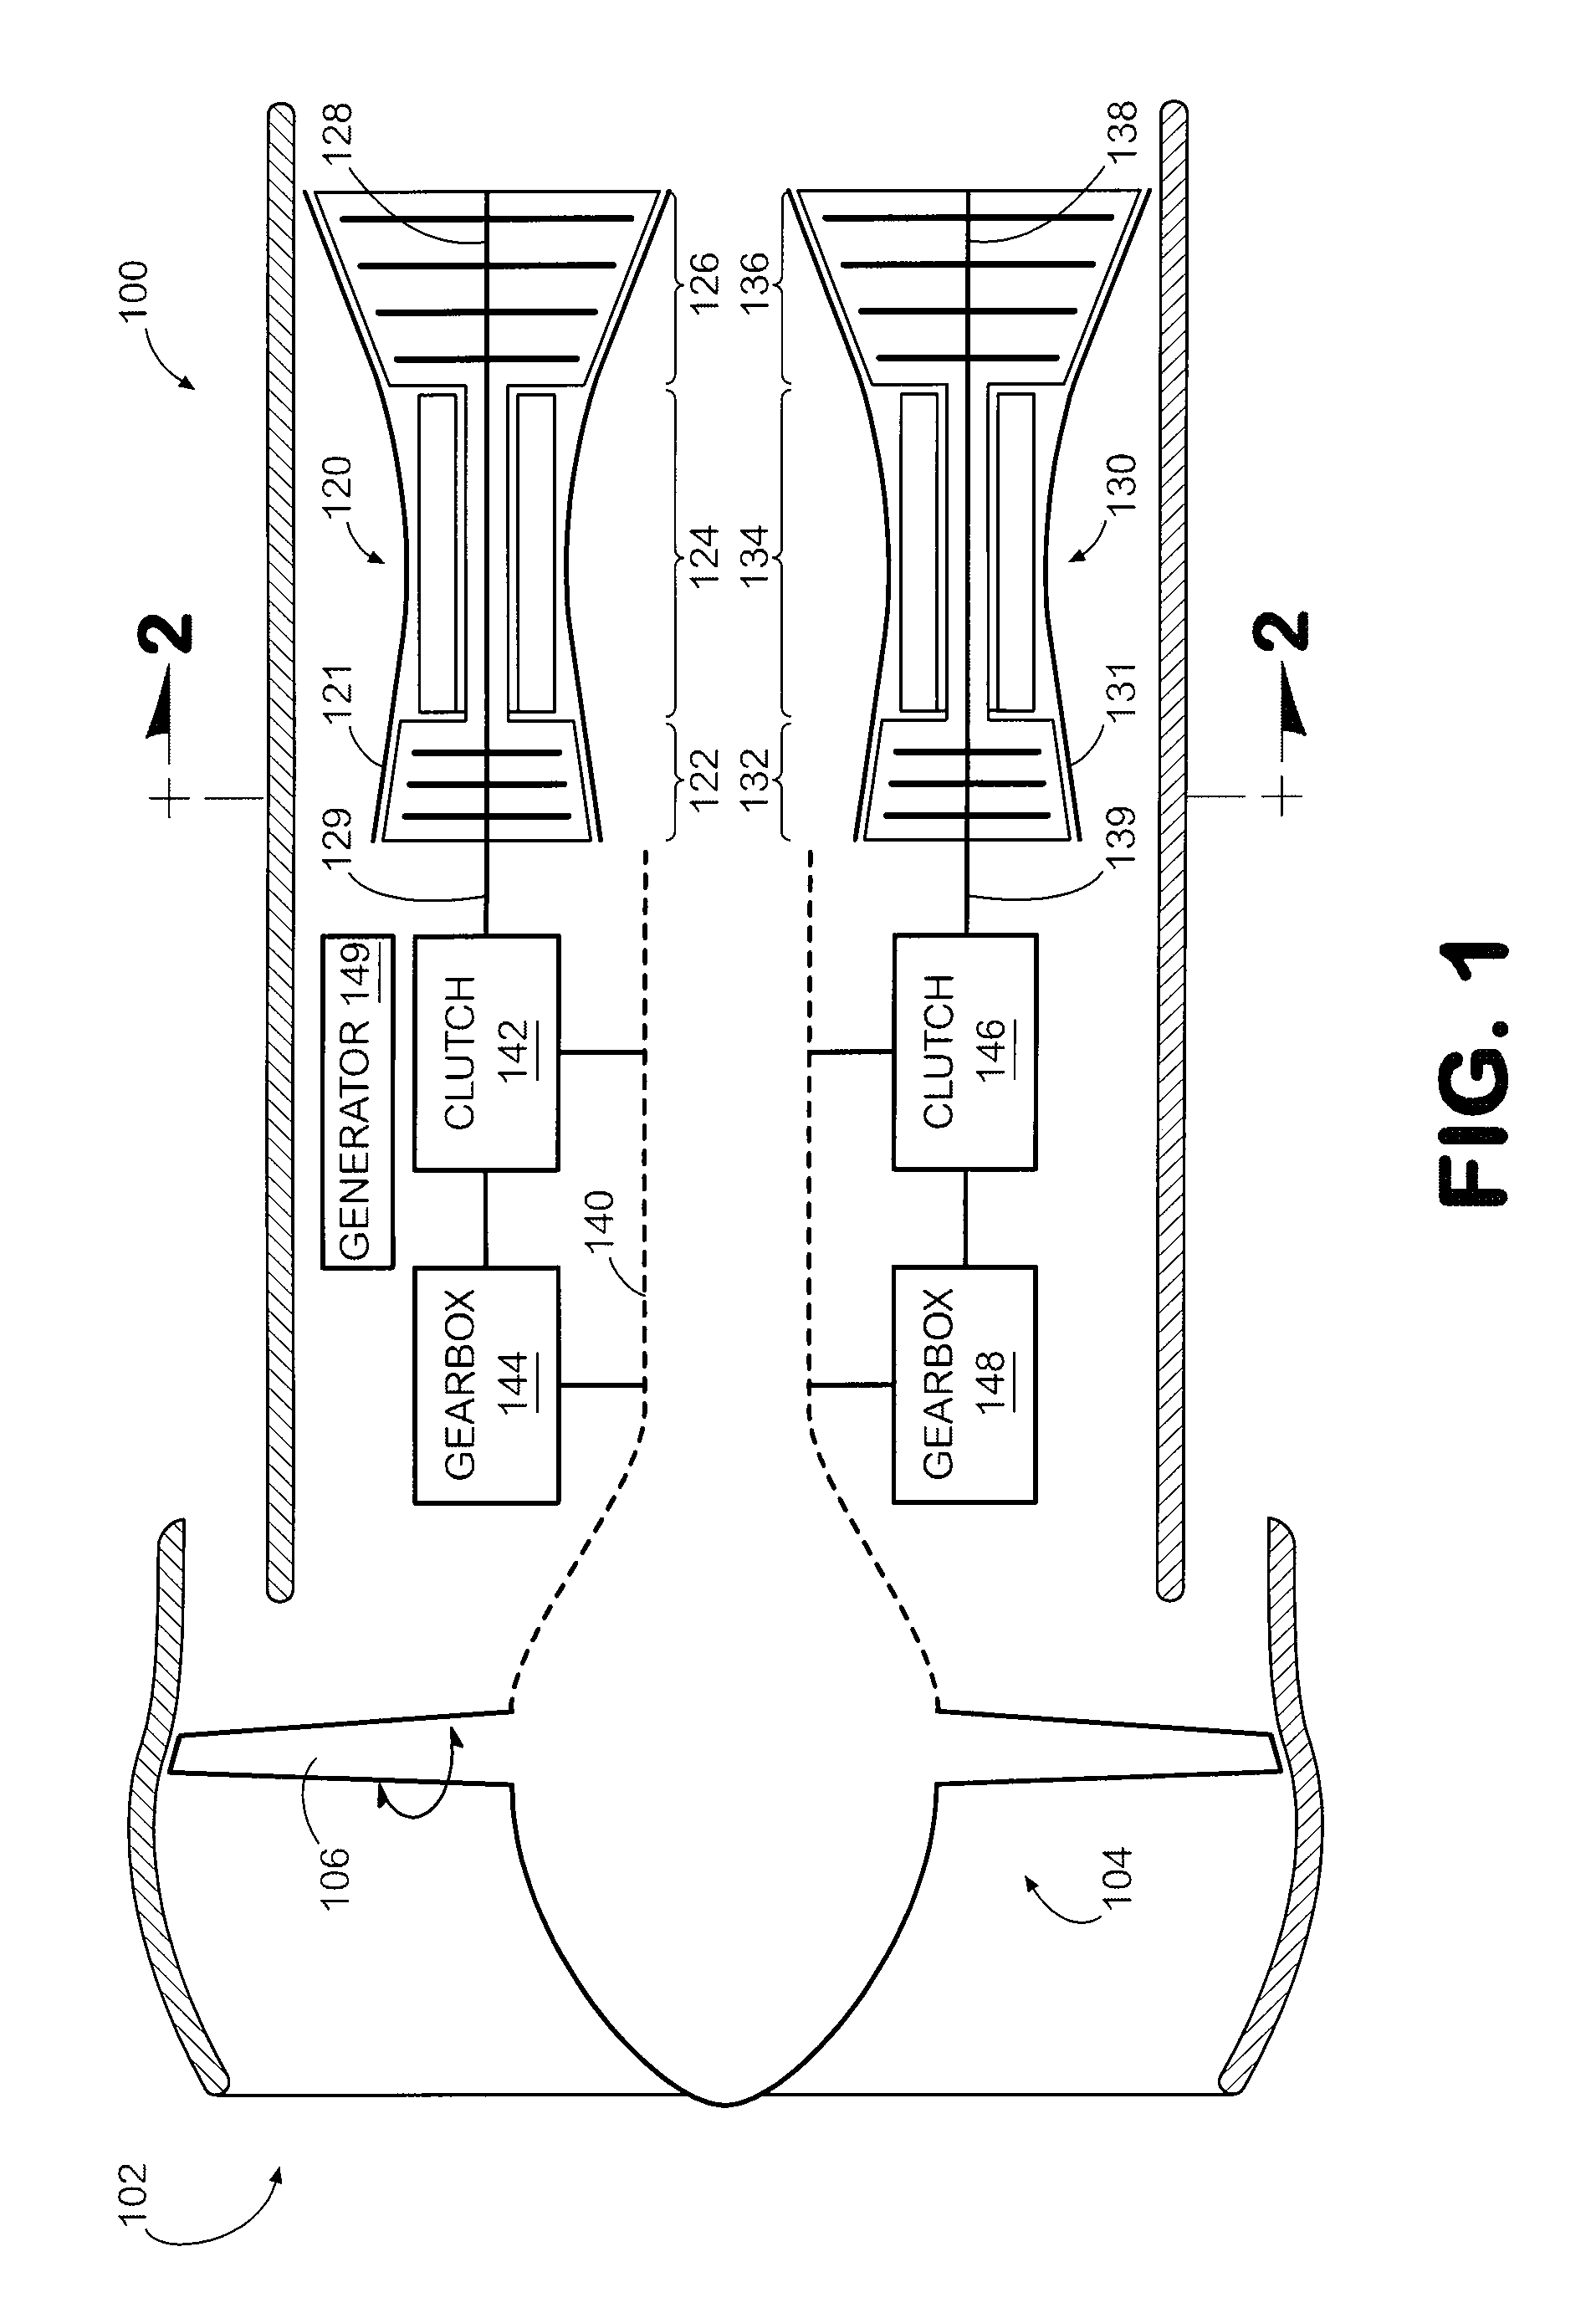 Gas Turbine Engine Systems and Related Methods Involving Multiple Gas Turbine Cores